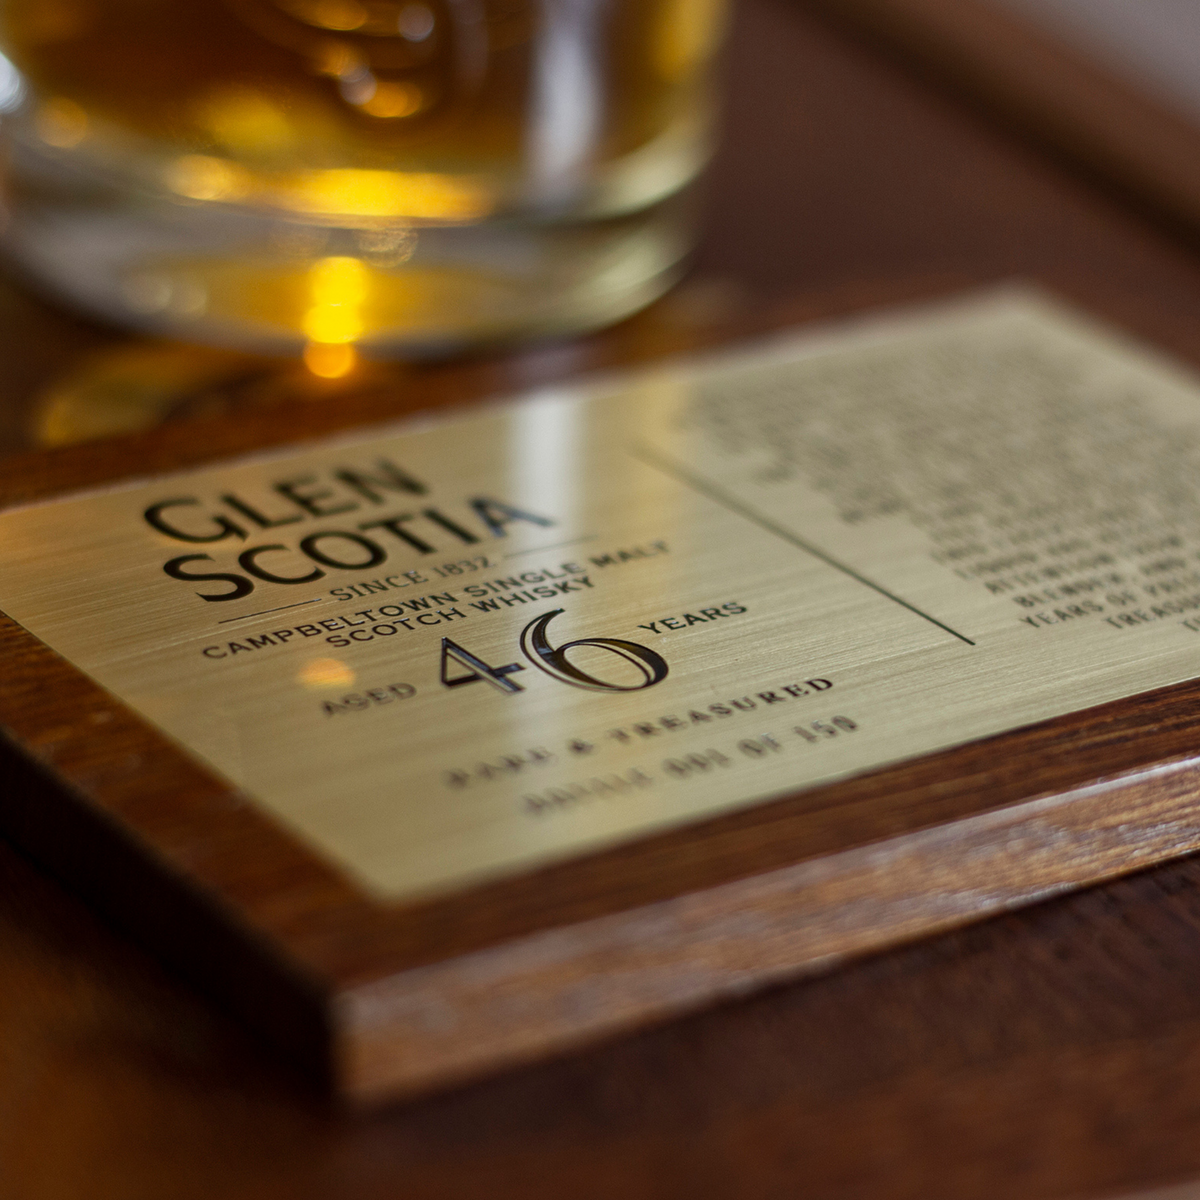 Glen Scotia 46 Year Old Whisky Plaque